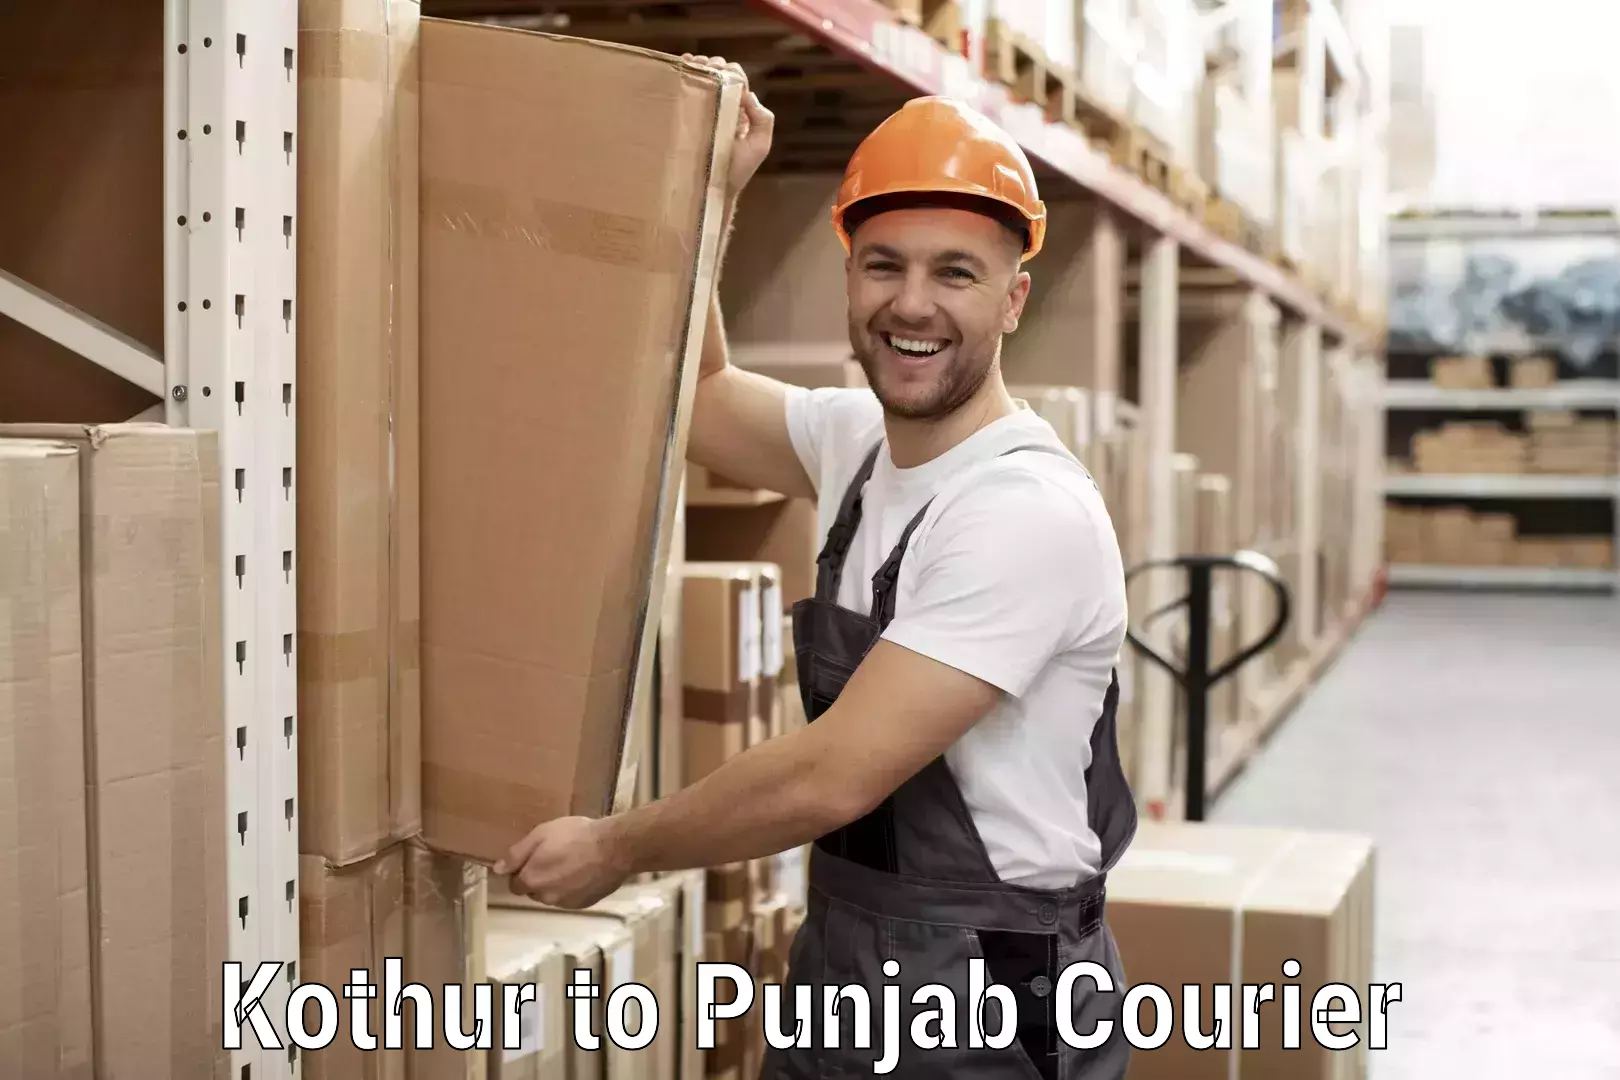 Courier rate comparison Kothur to Thapar Institute of Engineering and Technology Patiala